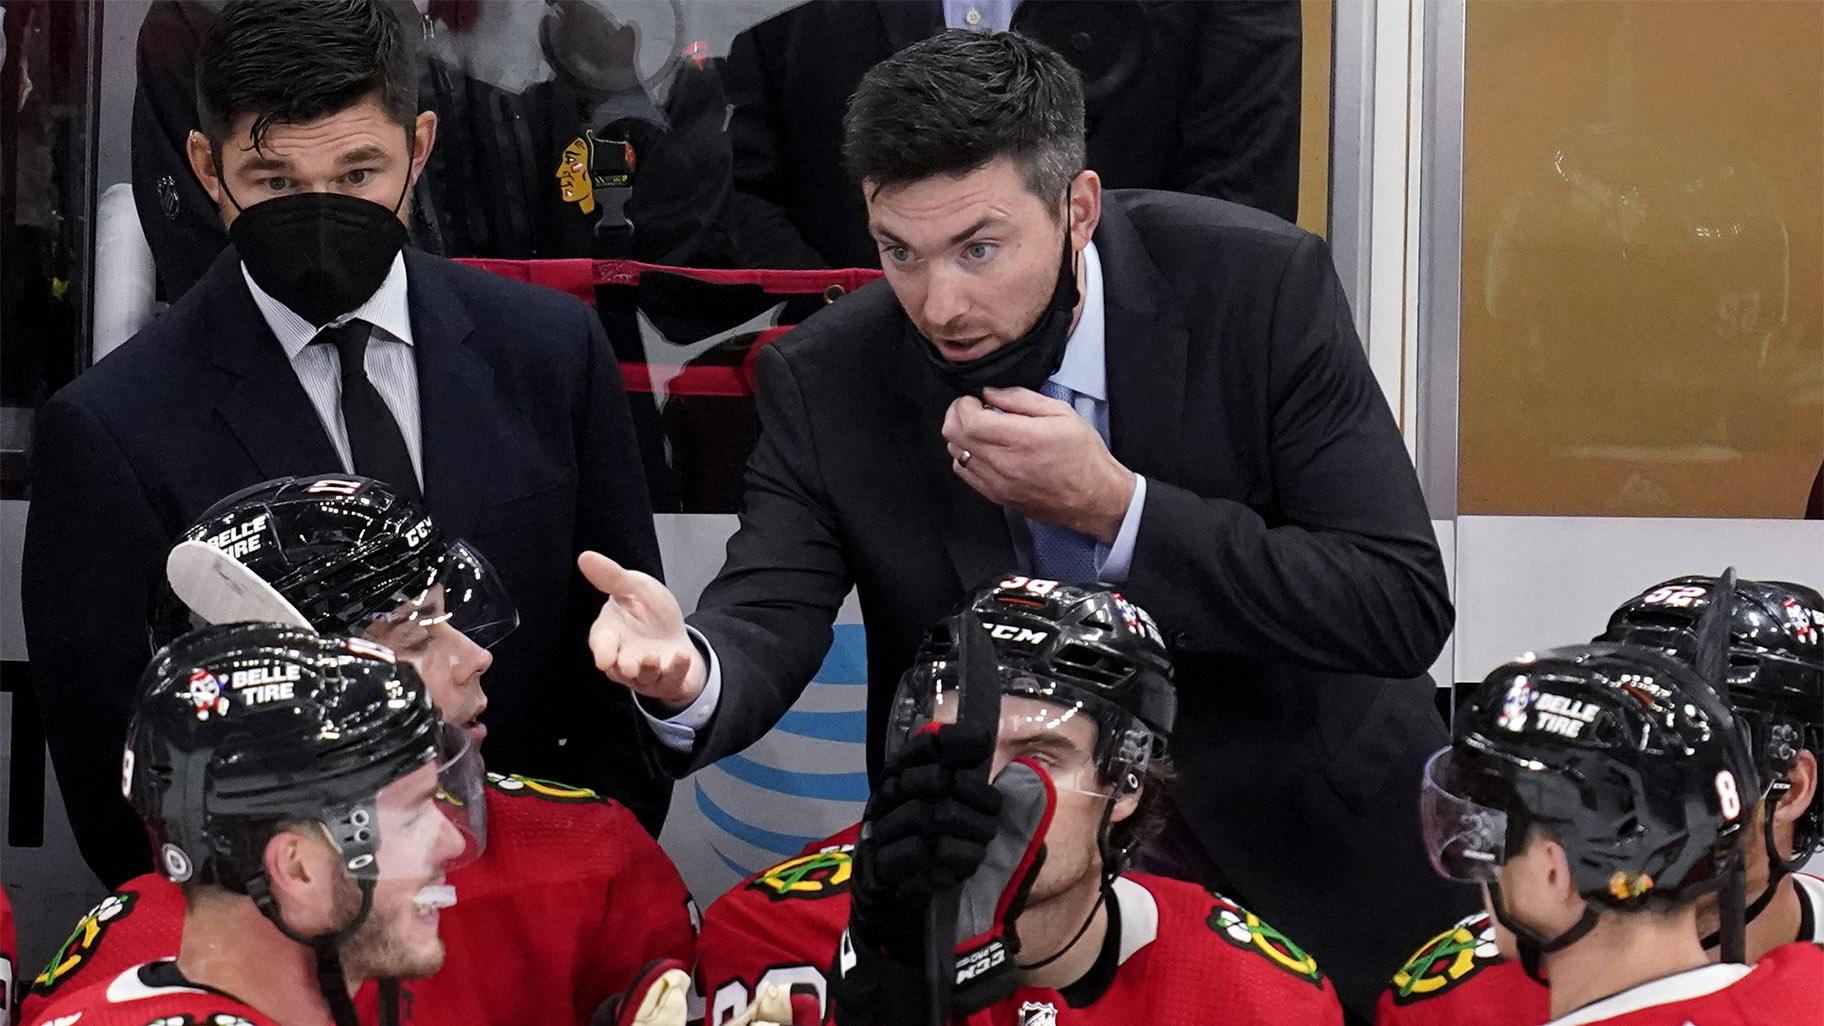 Chicago Blackhawks head coach Jeremy Colliton reacts as he talks to his team during the third period of an NHL hockey game against the Detroit Red Wings in Chicago, Sunday, Oct. 24, 2021. (AP Photo / Nam Y. Huh)